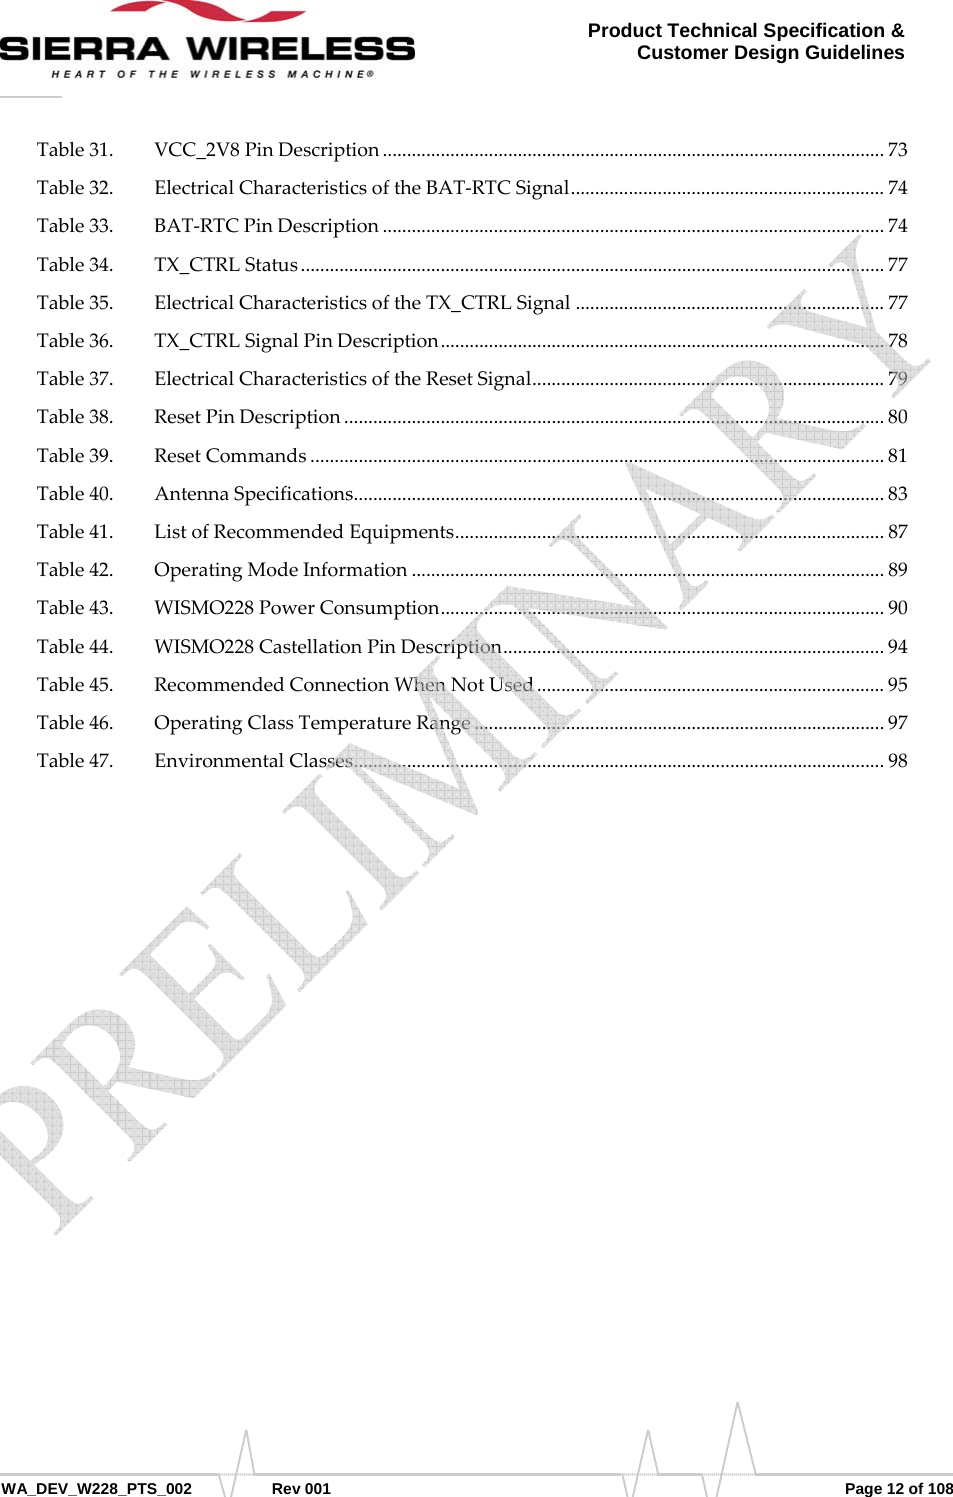      WA_DEV_W228_PTS_002 Rev 001  Page 12 of 108 Product Technical Specification &amp; Customer Design Guidelines Table31. VCC_2V8PinDescription........................................................................................................73 Table32. ElectricalCharacteristicsoftheBAT‐RTCSignal.................................................................74 Table33. BAT‐RTCPinDescription........................................................................................................74 Table34. TX_CTRLStatus.........................................................................................................................77 Table35. ElectricalCharacteristicsoftheTX_CTRLSignal................................................................77 Table36. TX_CTRLSignalPinDescription............................................................................................78 Table37. ElectricalCharacteristicsoftheResetSignal.........................................................................79 Table38. ResetPinDescription................................................................................................................80 Table39. ResetCommands.......................................................................................................................81 Table40. AntennaSpecifications..............................................................................................................83 Table41. ListofRecommendedEquipments.........................................................................................87 Table42. OperatingModeInformation..................................................................................................89 Table43. WISMO228PowerConsumption............................................................................................90 Table44. WISMO228CastellationPinDescription...............................................................................94 Table45. RecommendedConnectionWhenNotUsed........................................................................95 Table46. OperatingClassTemperatureRange.....................................................................................97 Table47. EnvironmentalClasses..............................................................................................................98    